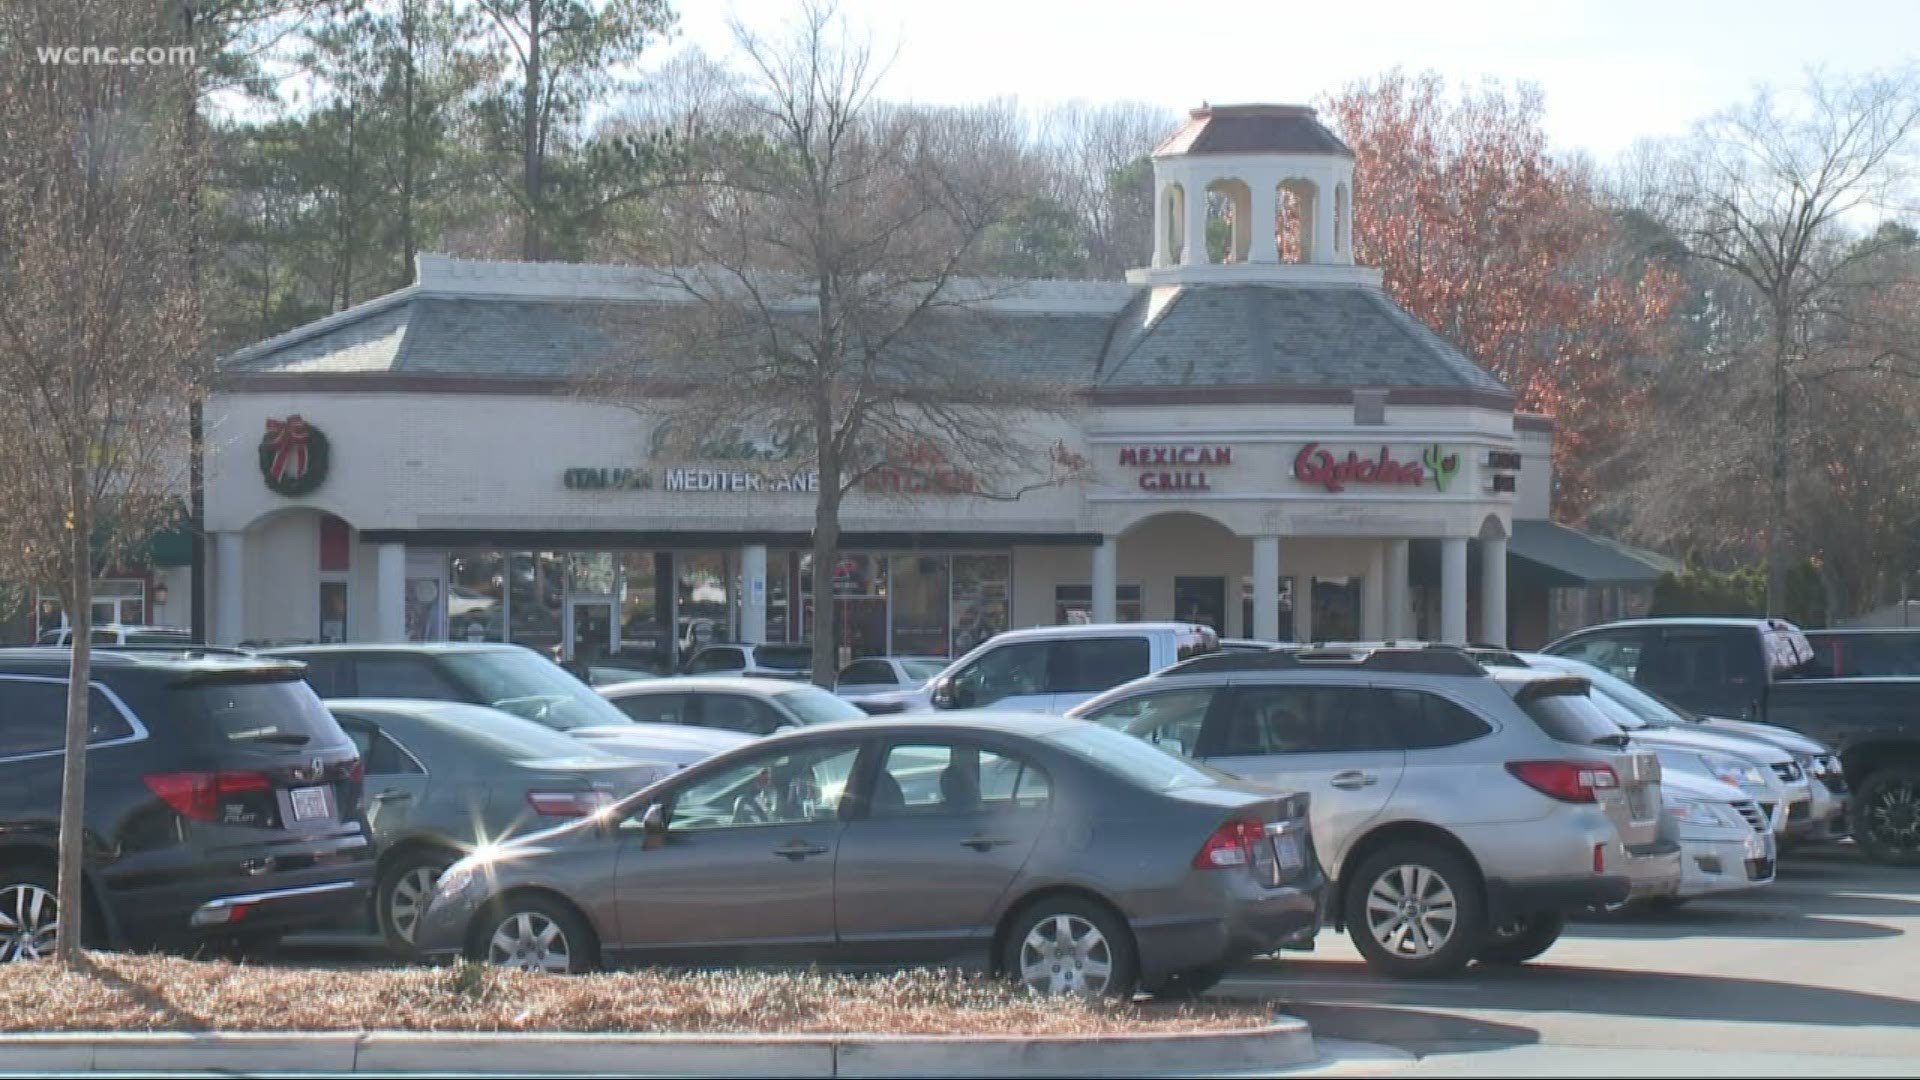 Police say the suspect pulled a gun on a woman at the Arboretum Shopping Center on Friday. That’s when the victim says she was kidnapped in her own SUV.